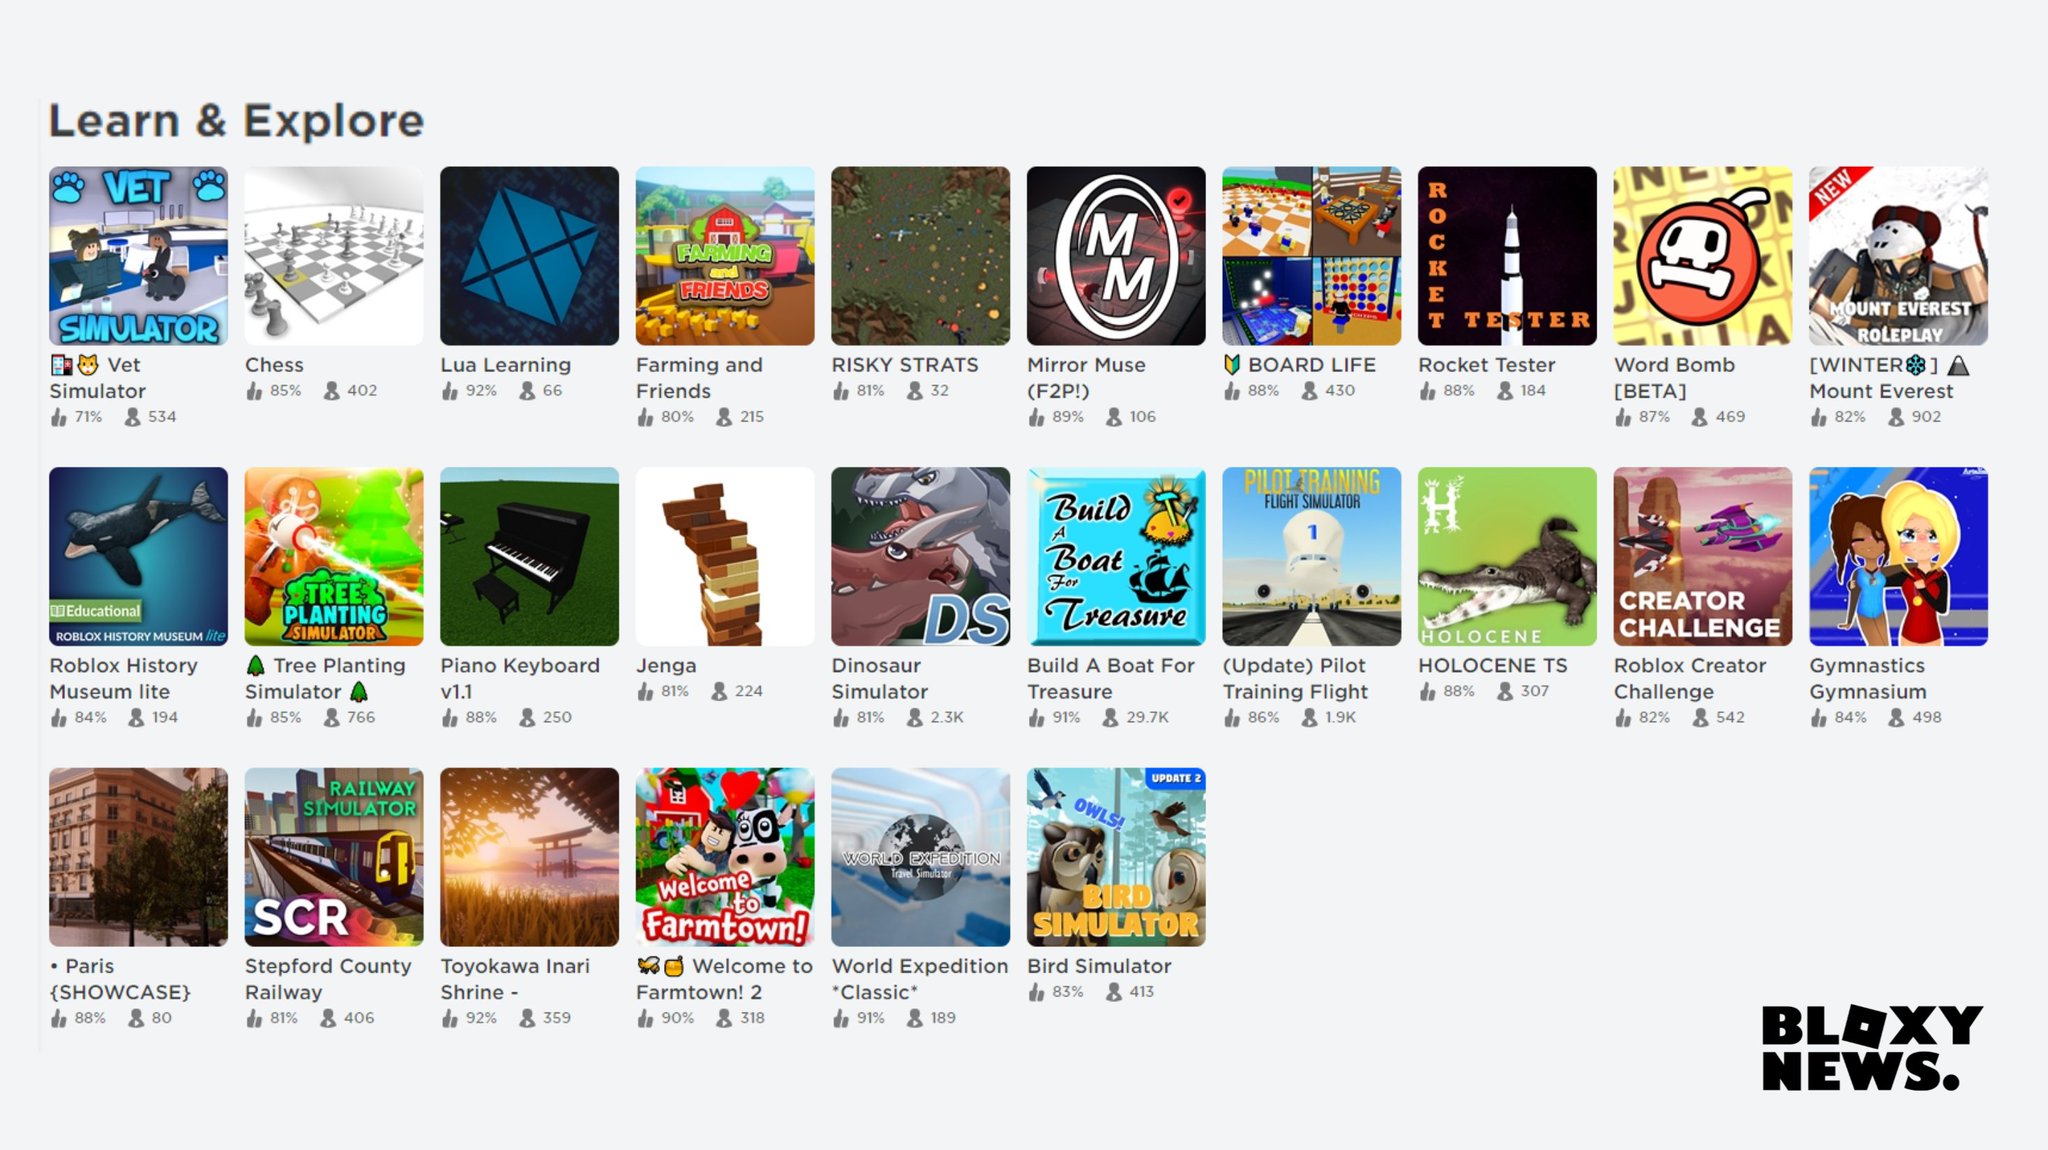 Bloxy News On Twitter There Is A Brand New Category On The Roblox Games Page Called Learn Explore This Game Sort Will Feature Games That Enable Players To Learn In A - the end of build a boat for treasure roblox